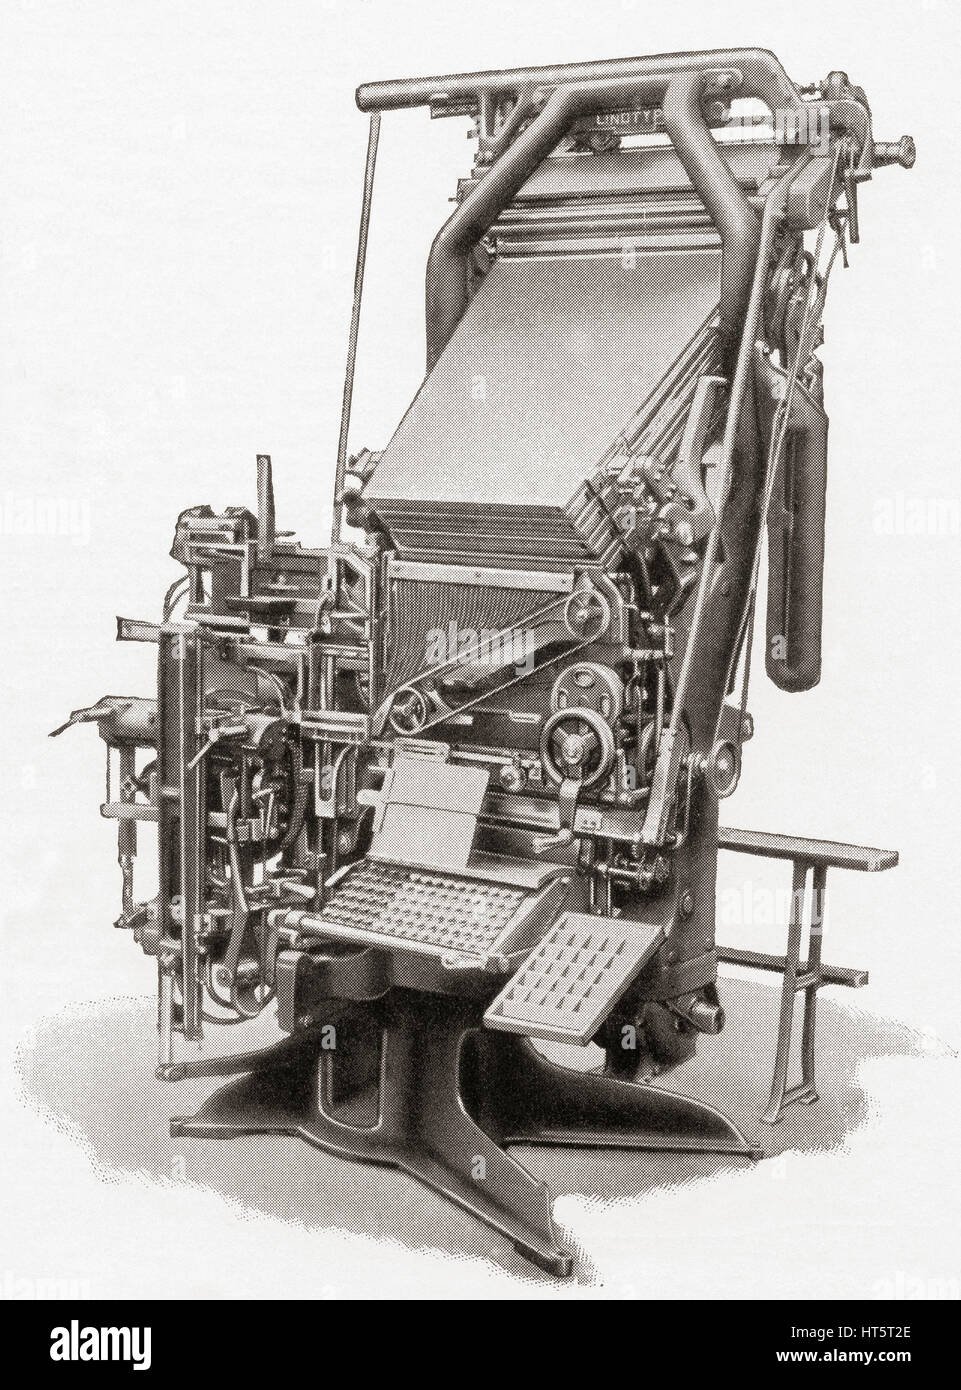 A linotype machine, a line casting machine used in printing.   From Meyers Lexicon, published 1927. Stock Photo